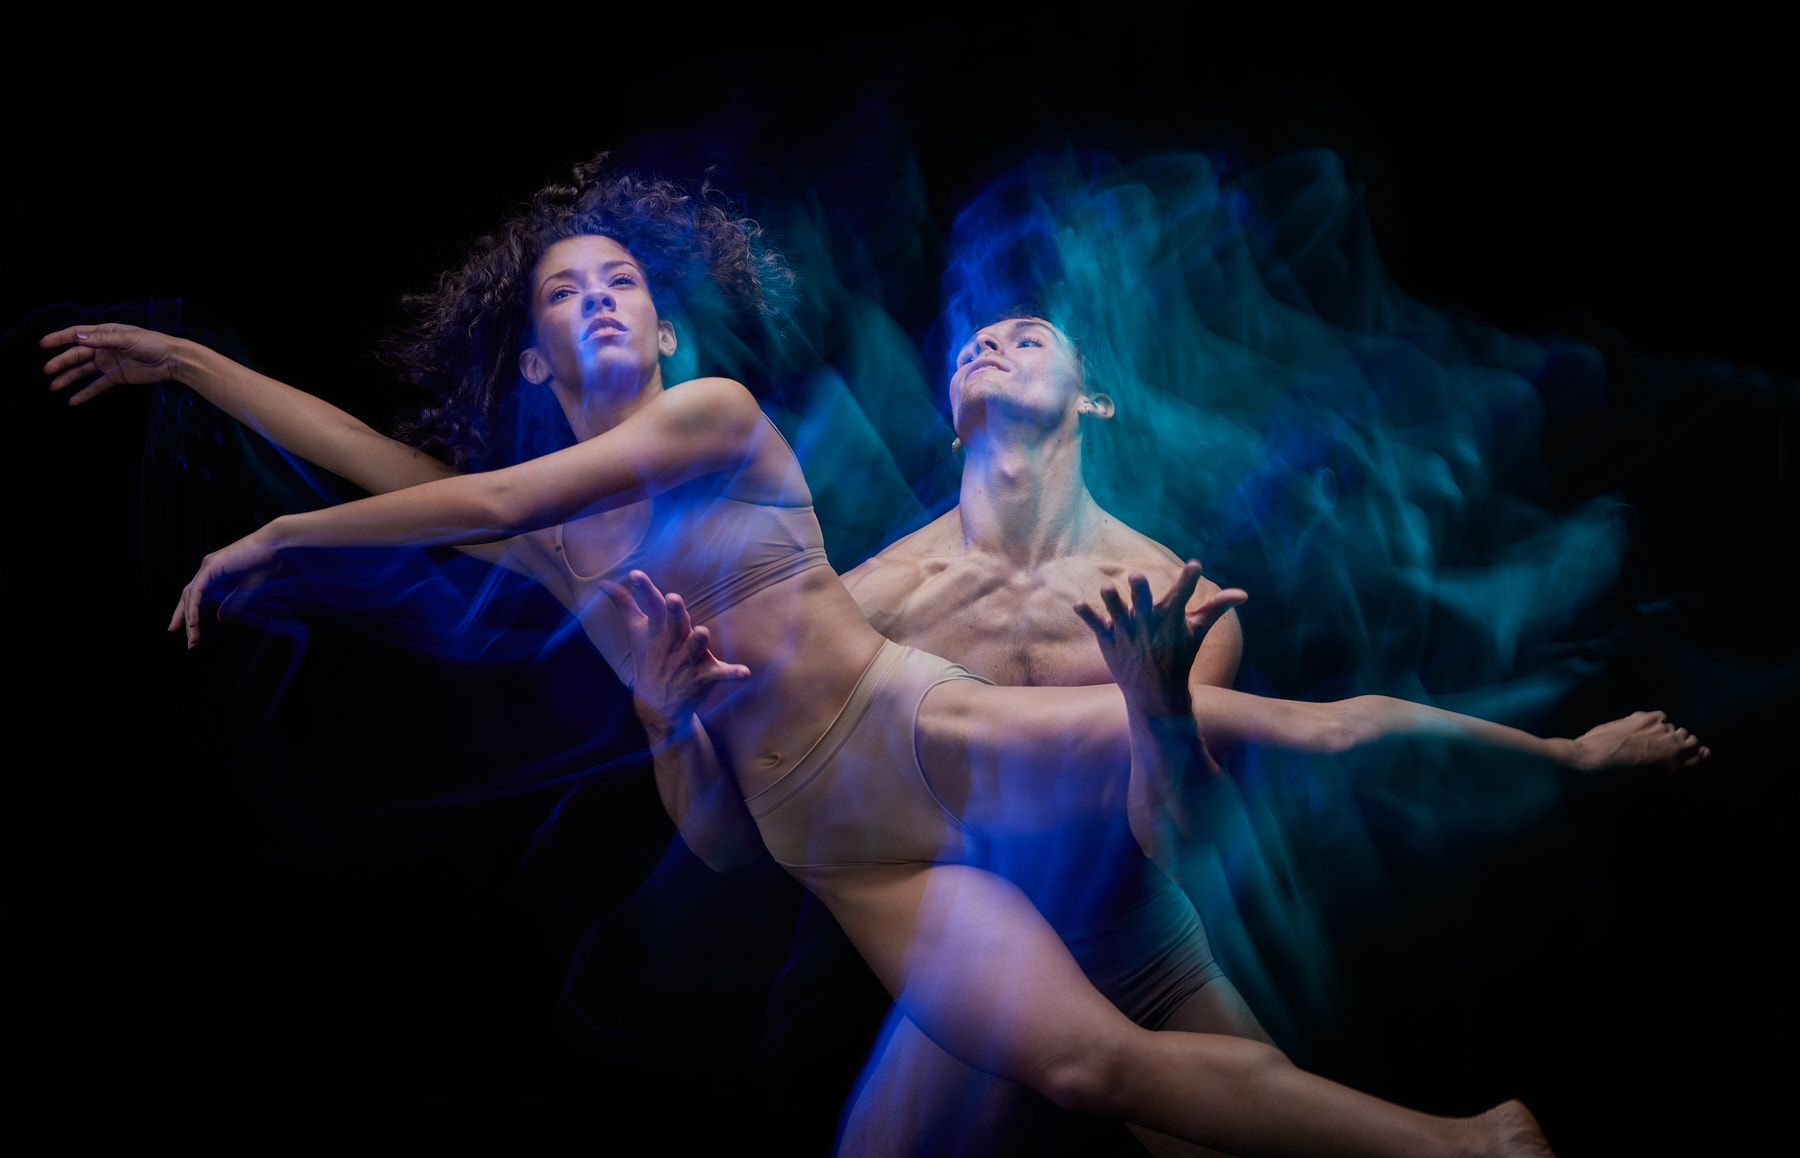 Company Dancer Naiara de Matos leaps into the air held by Riley Fitzgerald. They are bathed in soft blue light.